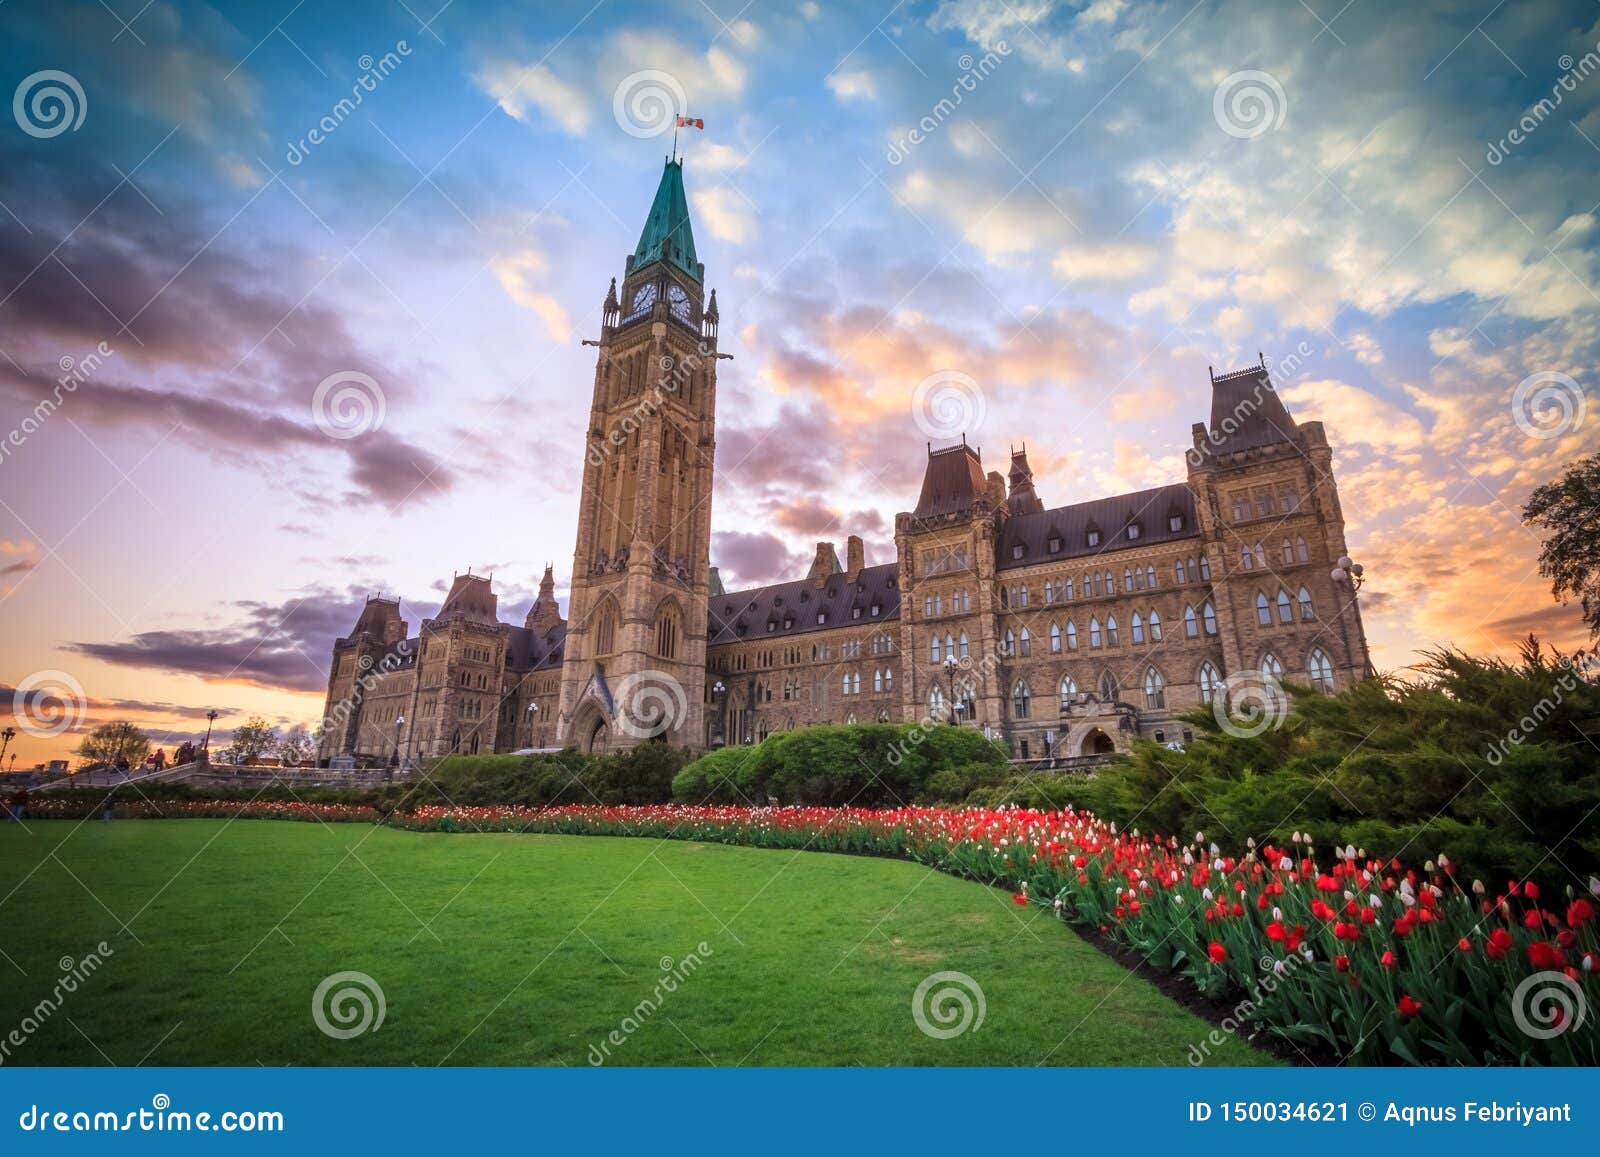 view of canada parliament building in ottawa